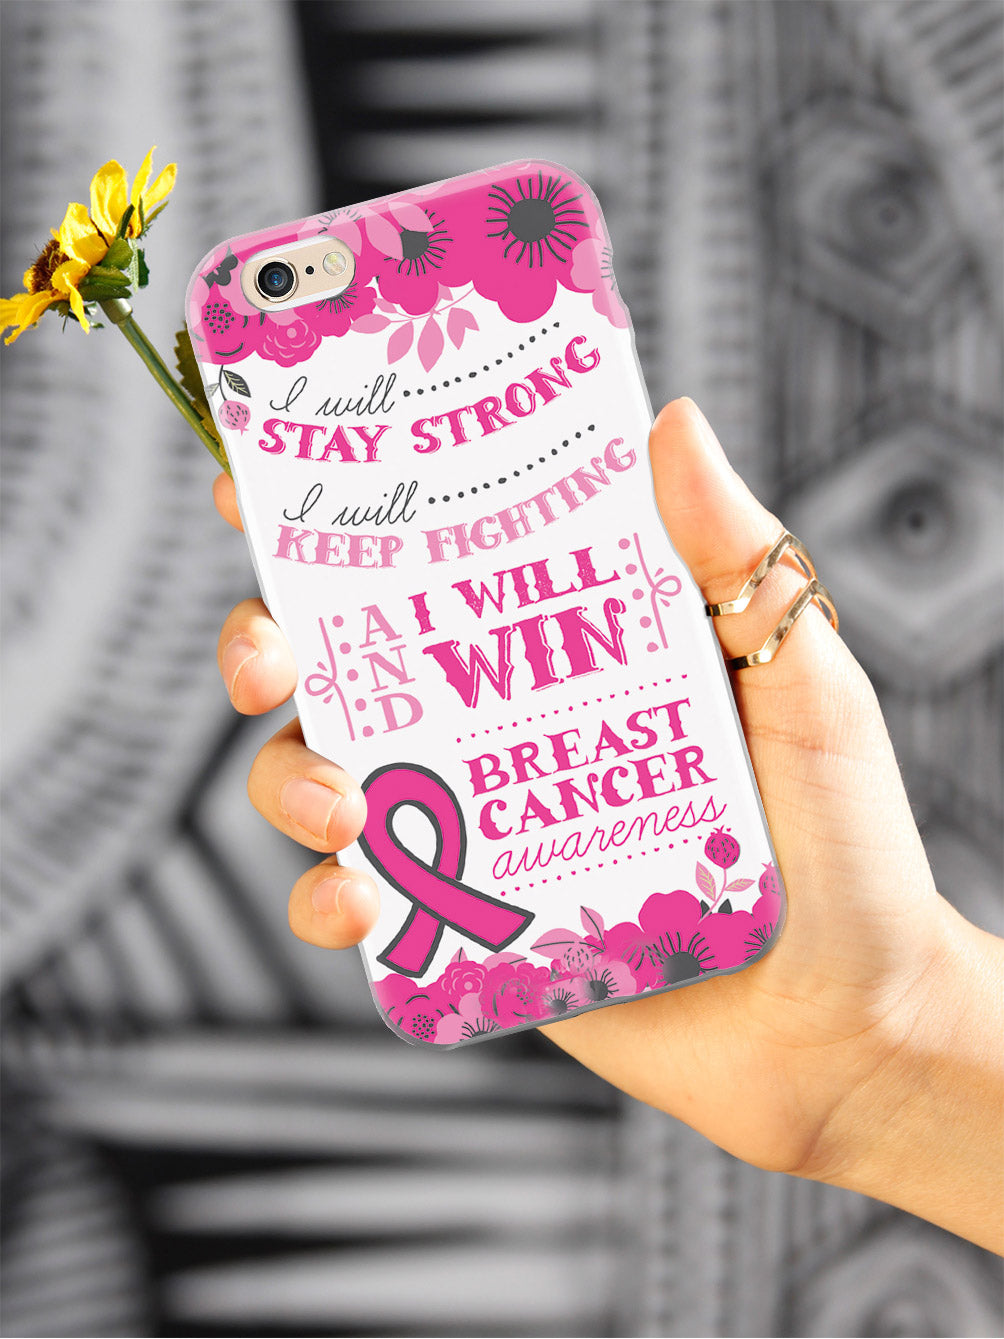 I Will Win - Breast Cancer Awareness Case